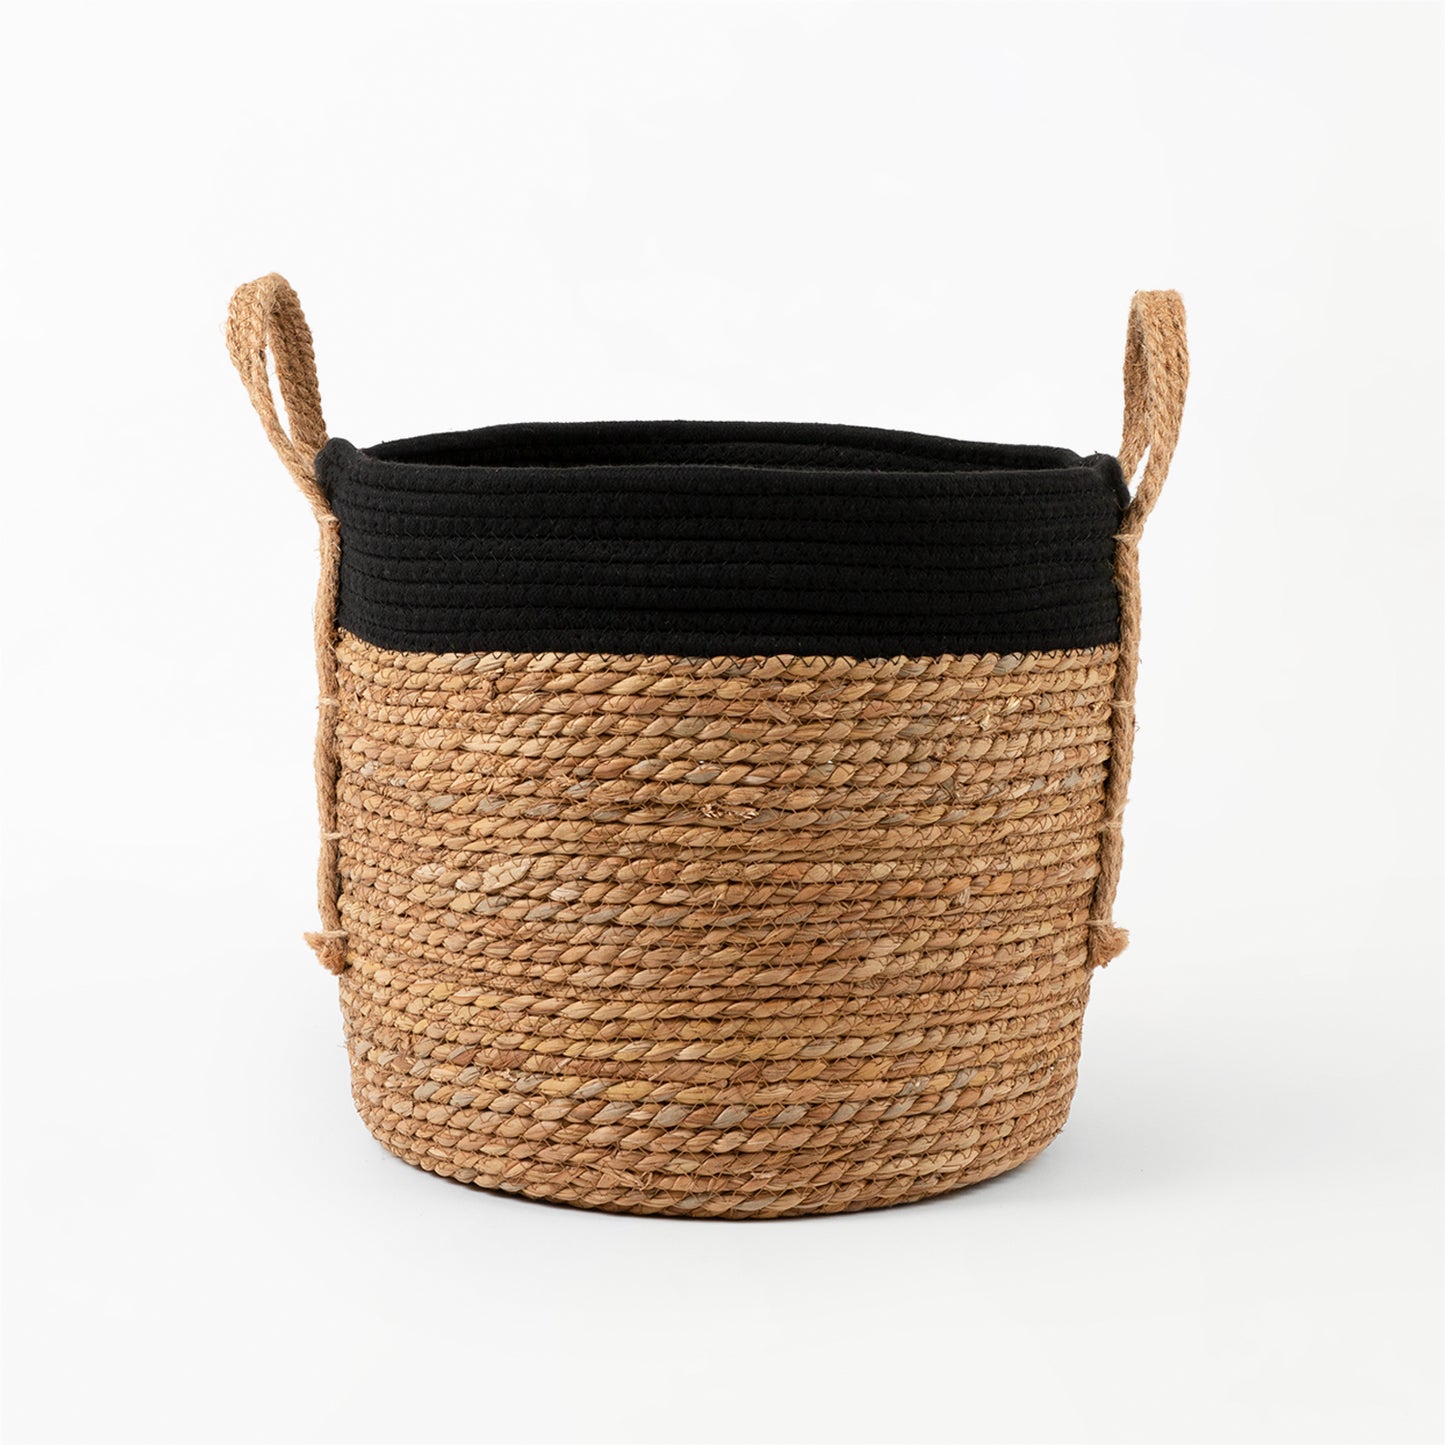 Black rope top basket with grass woven bottom and hemp handles. 